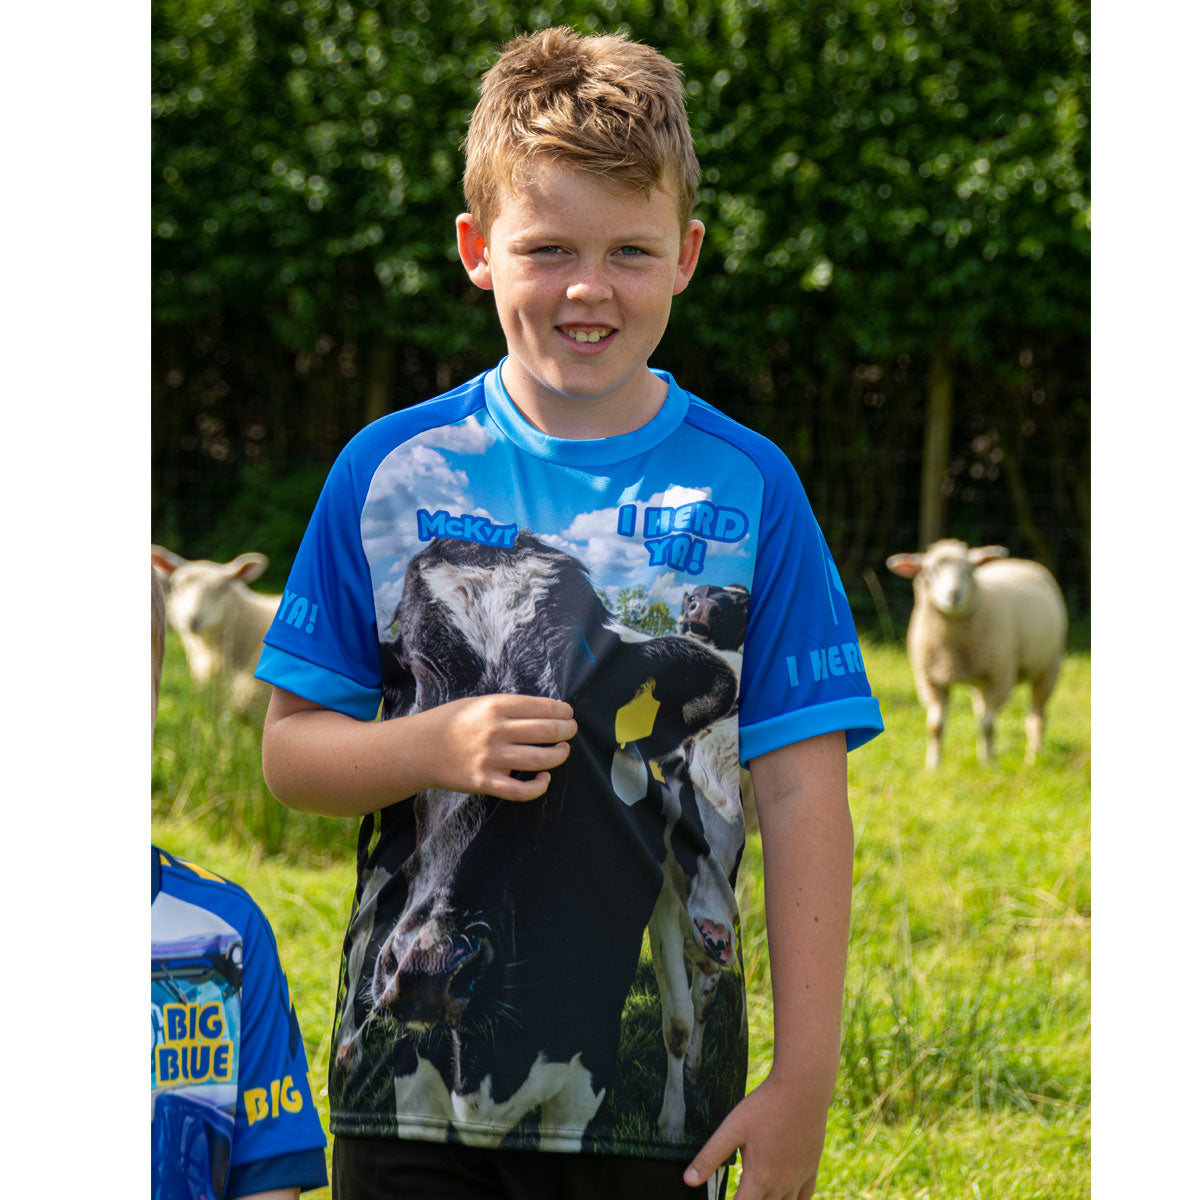 Mc Keever I Herd YA! 2023 Ploughing Championships Jersey - Youth